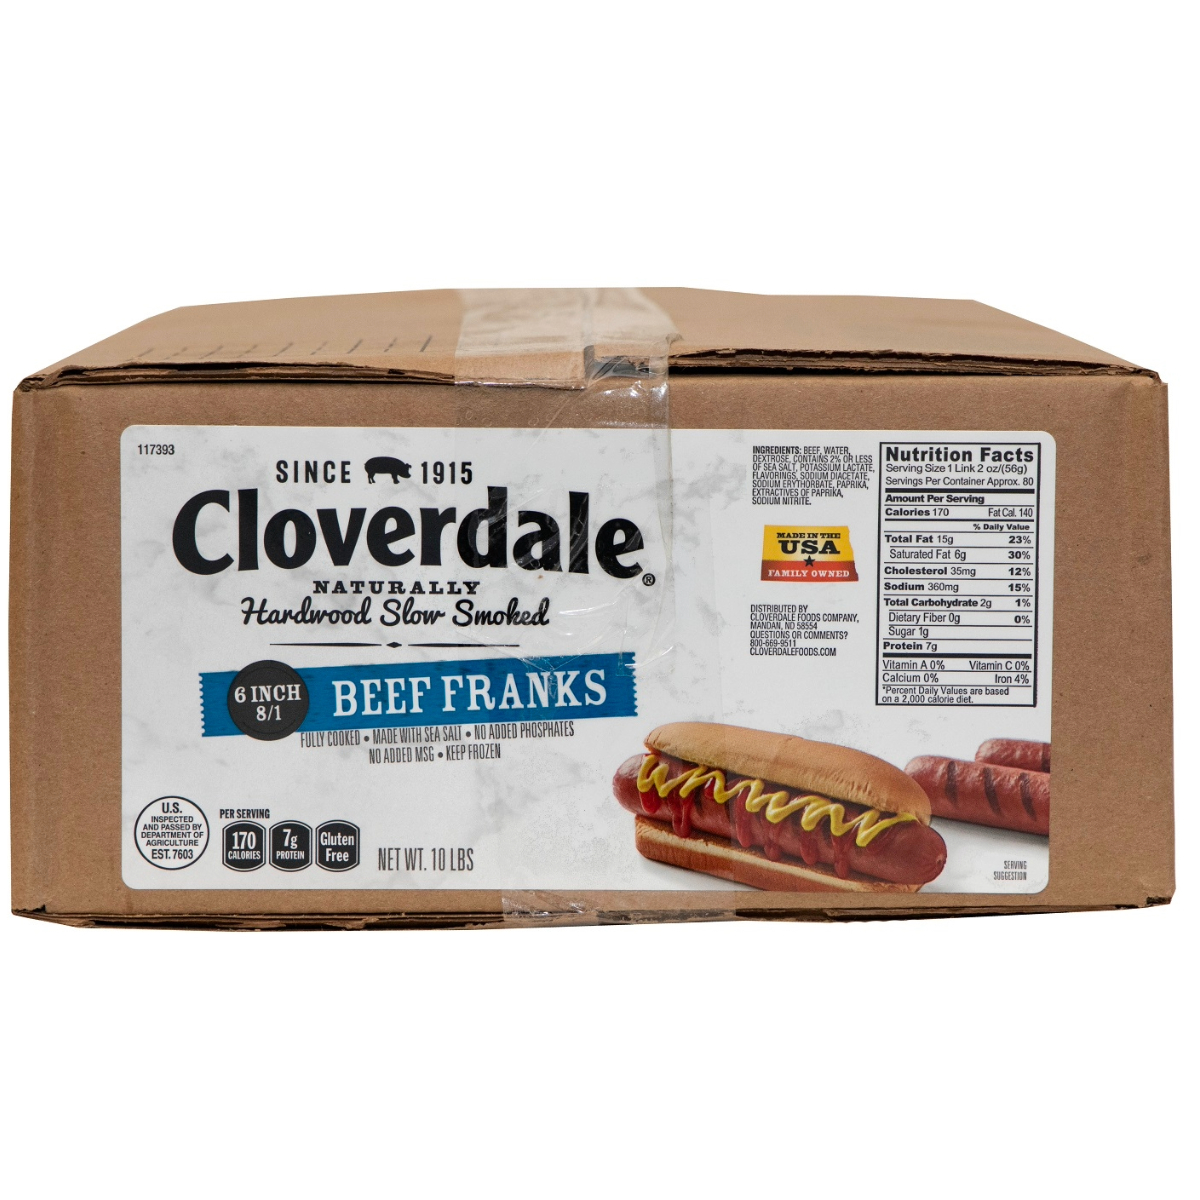 CLOVERDALE BEEF HOT DOGS 6 INCH 8/1 FRANKS